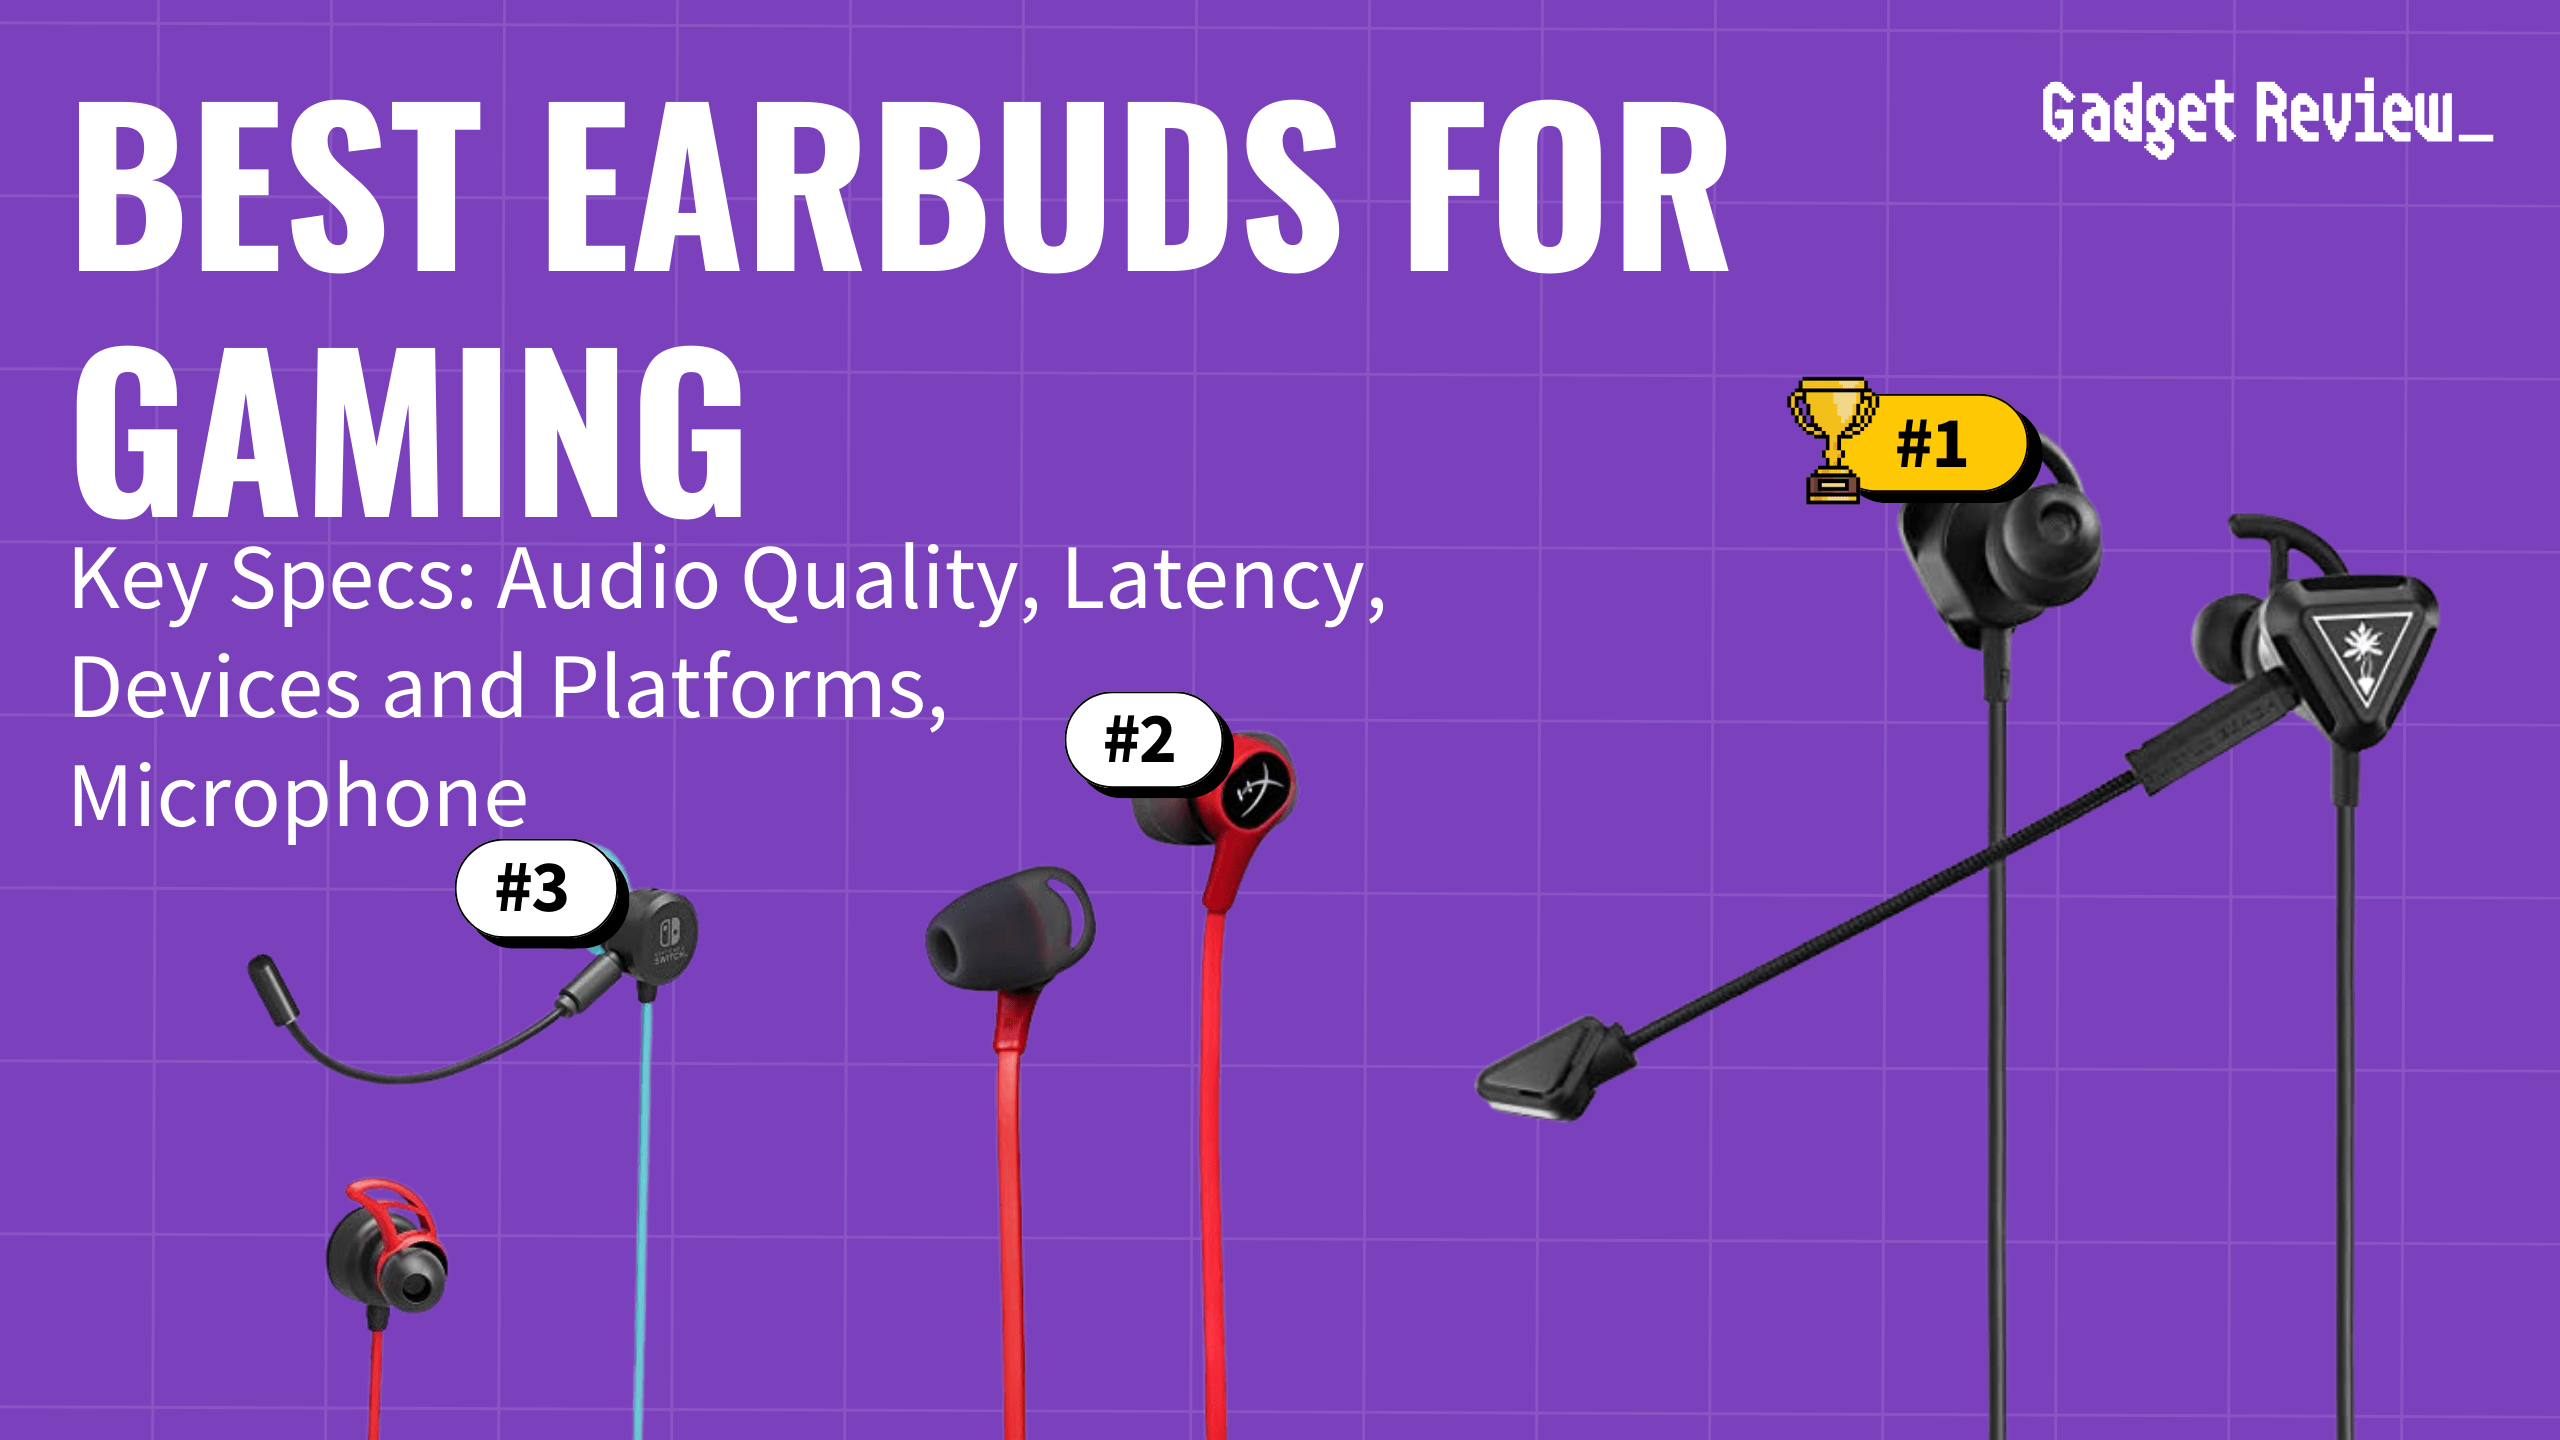 Best Earbuds for Gaming